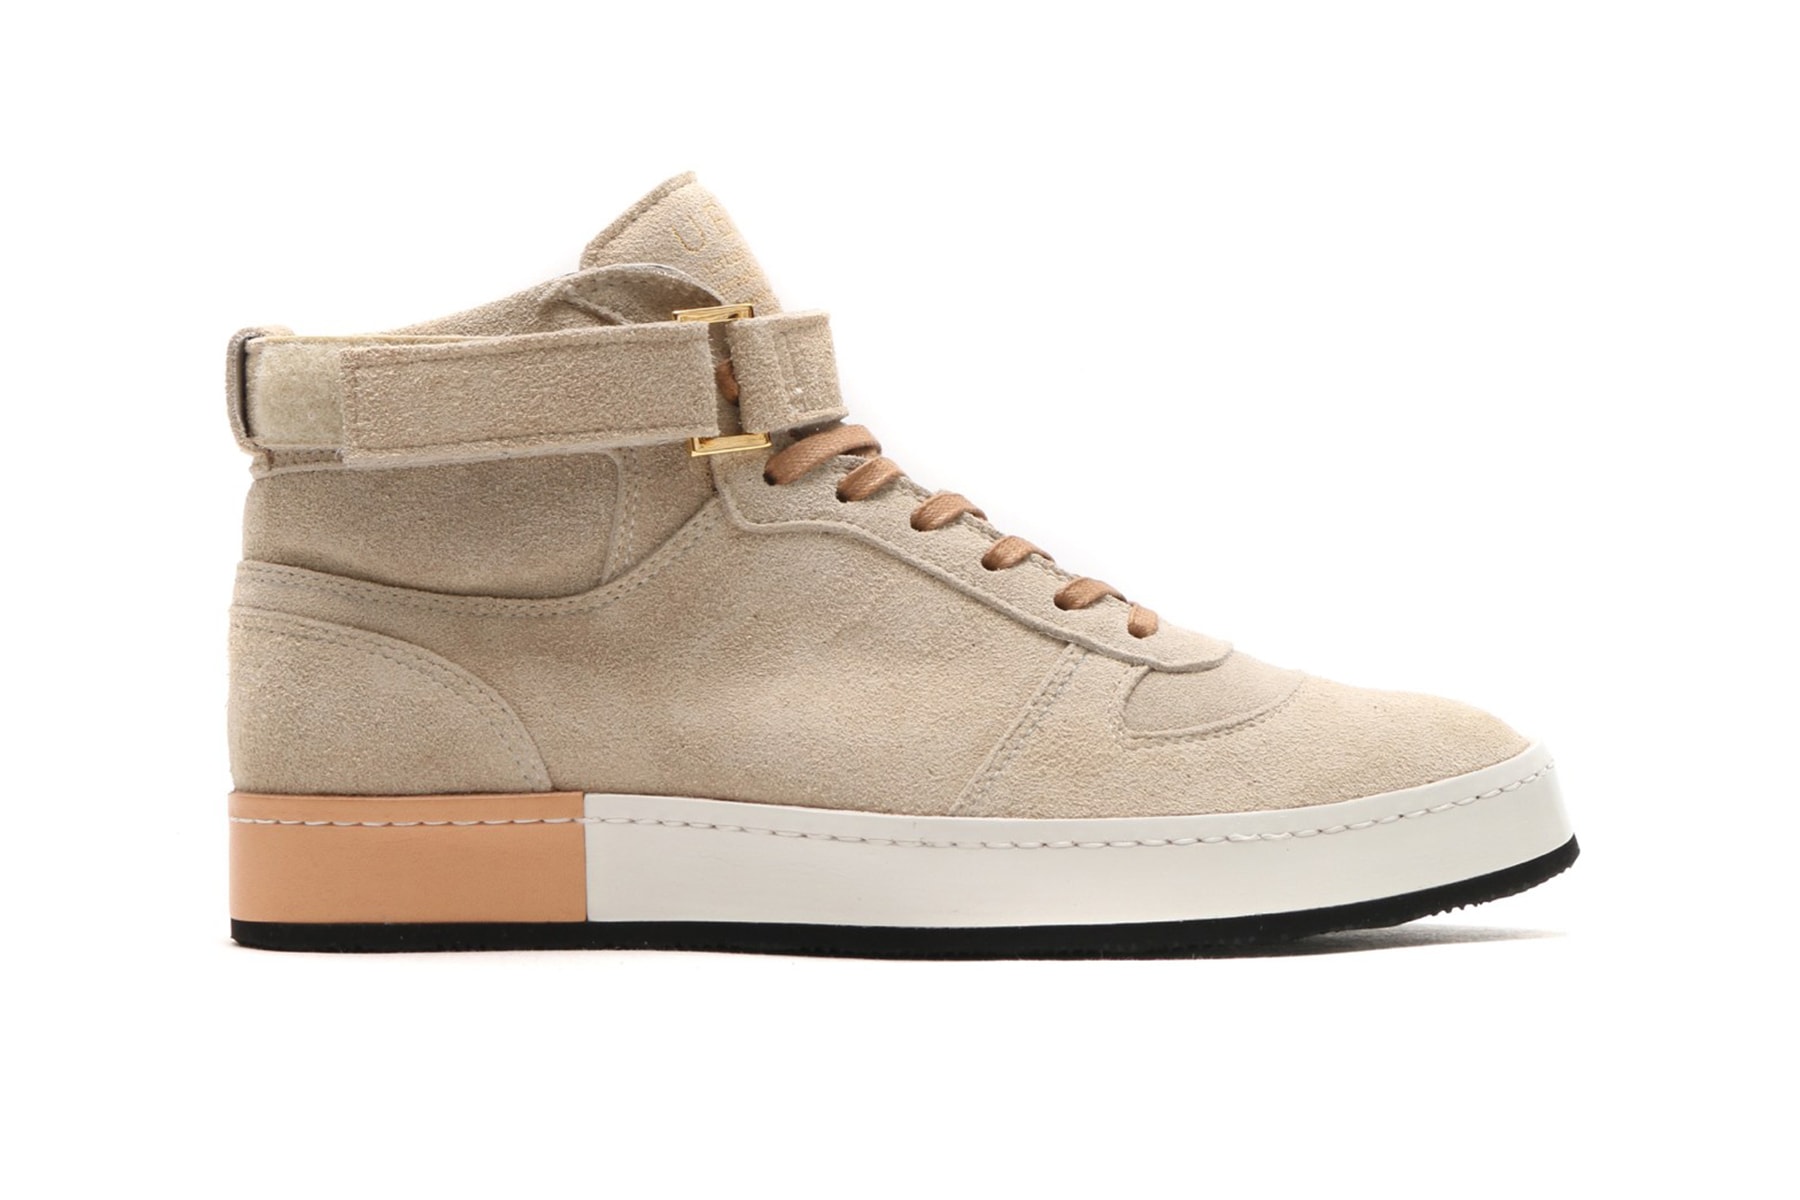 UBIQ MADE in JAPAN Series Introduces VAGET J beige natural black tan leather suede sneakers boots